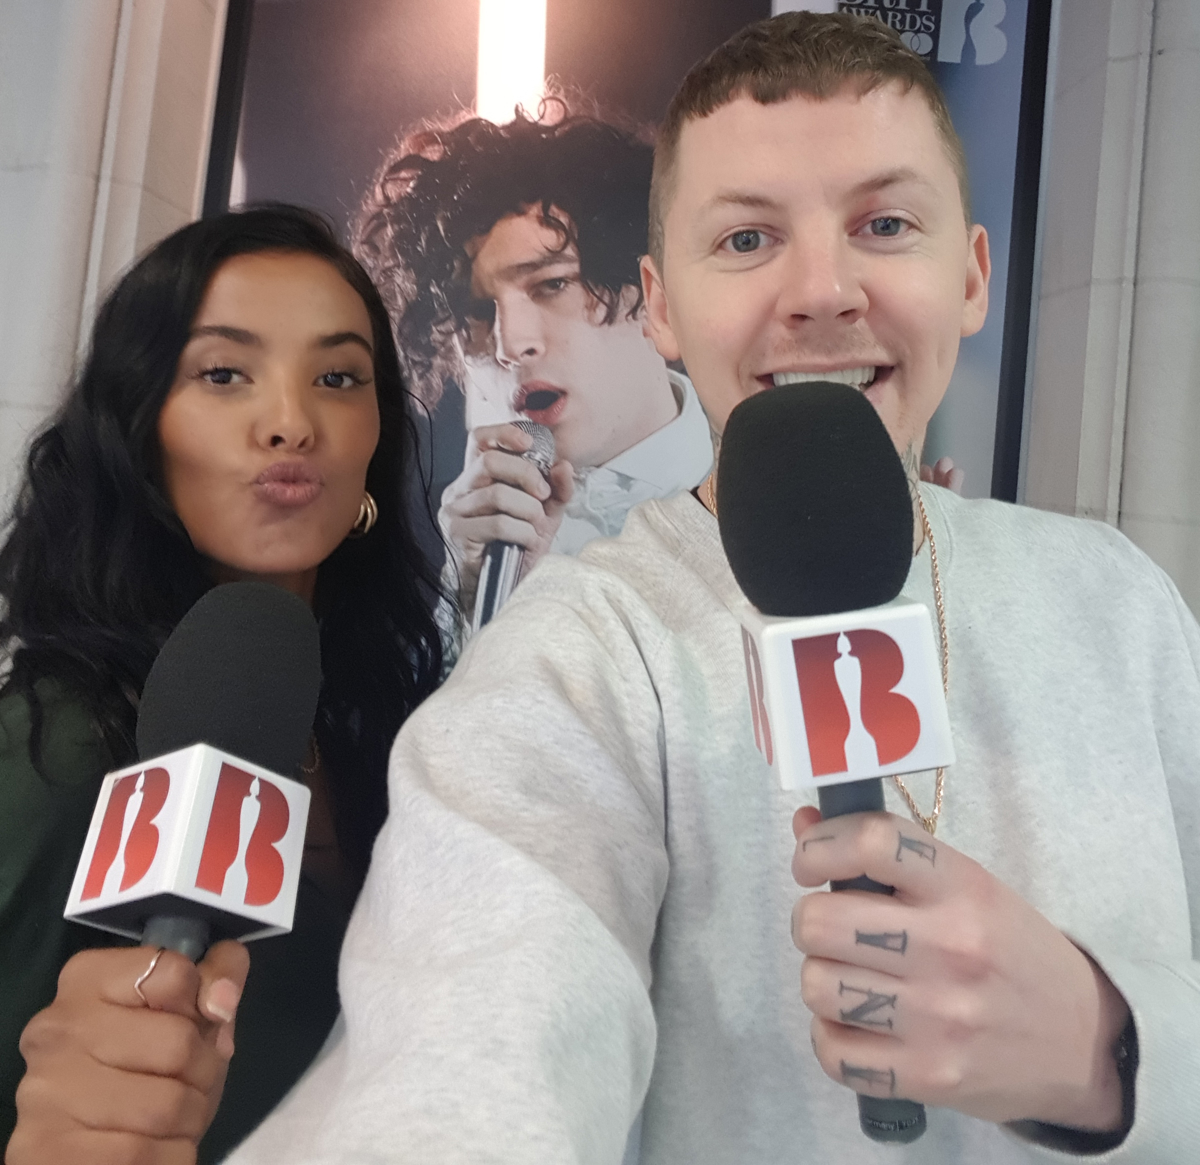 The BRIT Awards confirm Maya Jama & Professor Green to present live on Facebook from the red carpet 